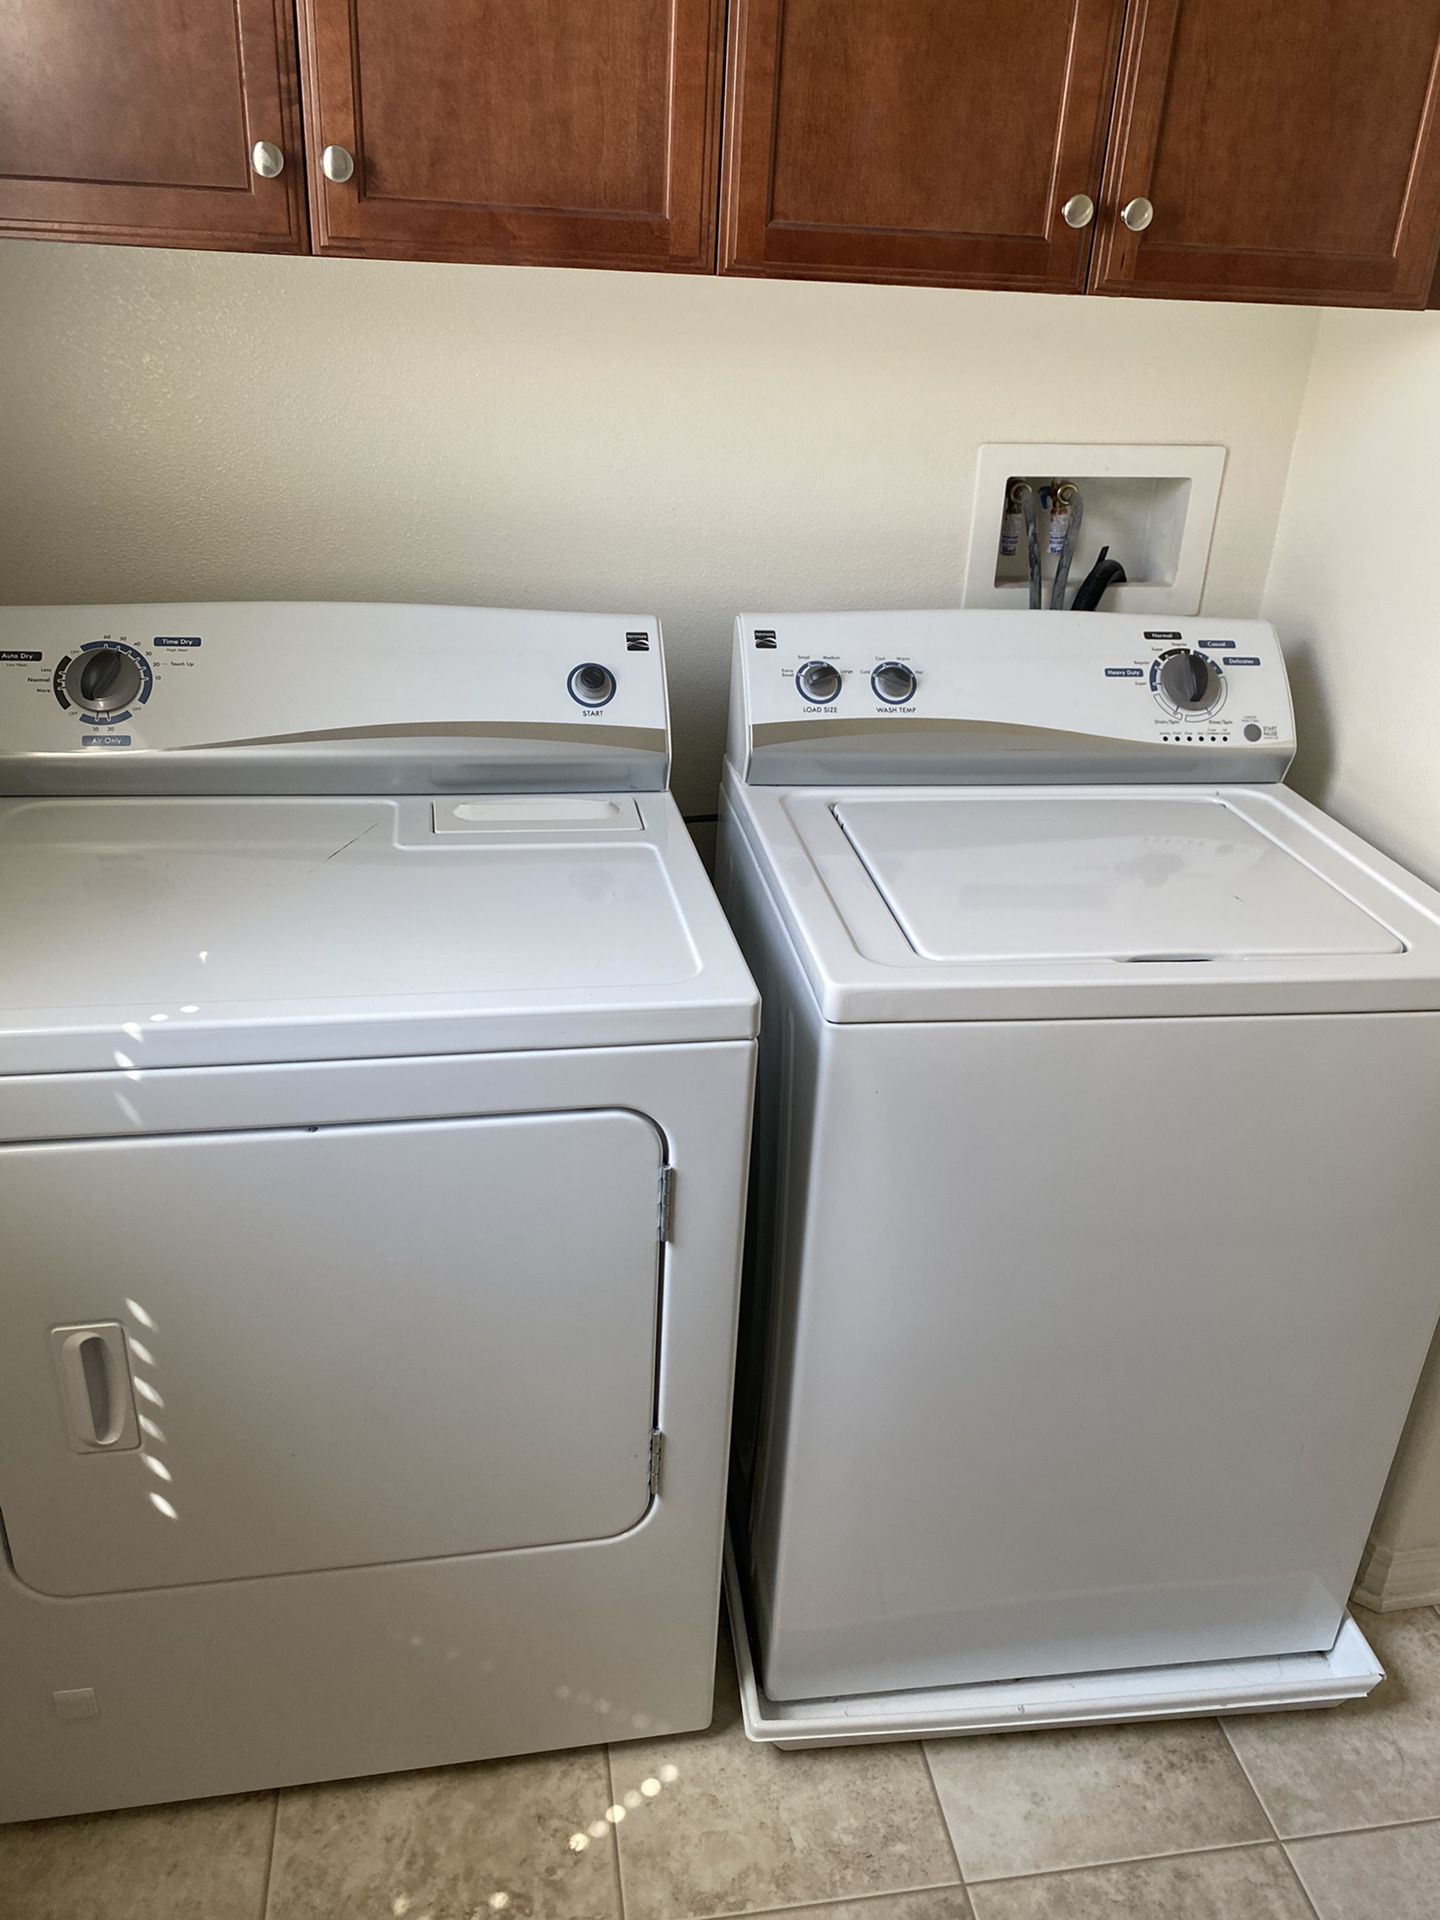 Kenmore Washer and dryer set. Moving and the new place already has a set. Works perfectly fine. Our loss, your gain. We need to use until 4/25 so